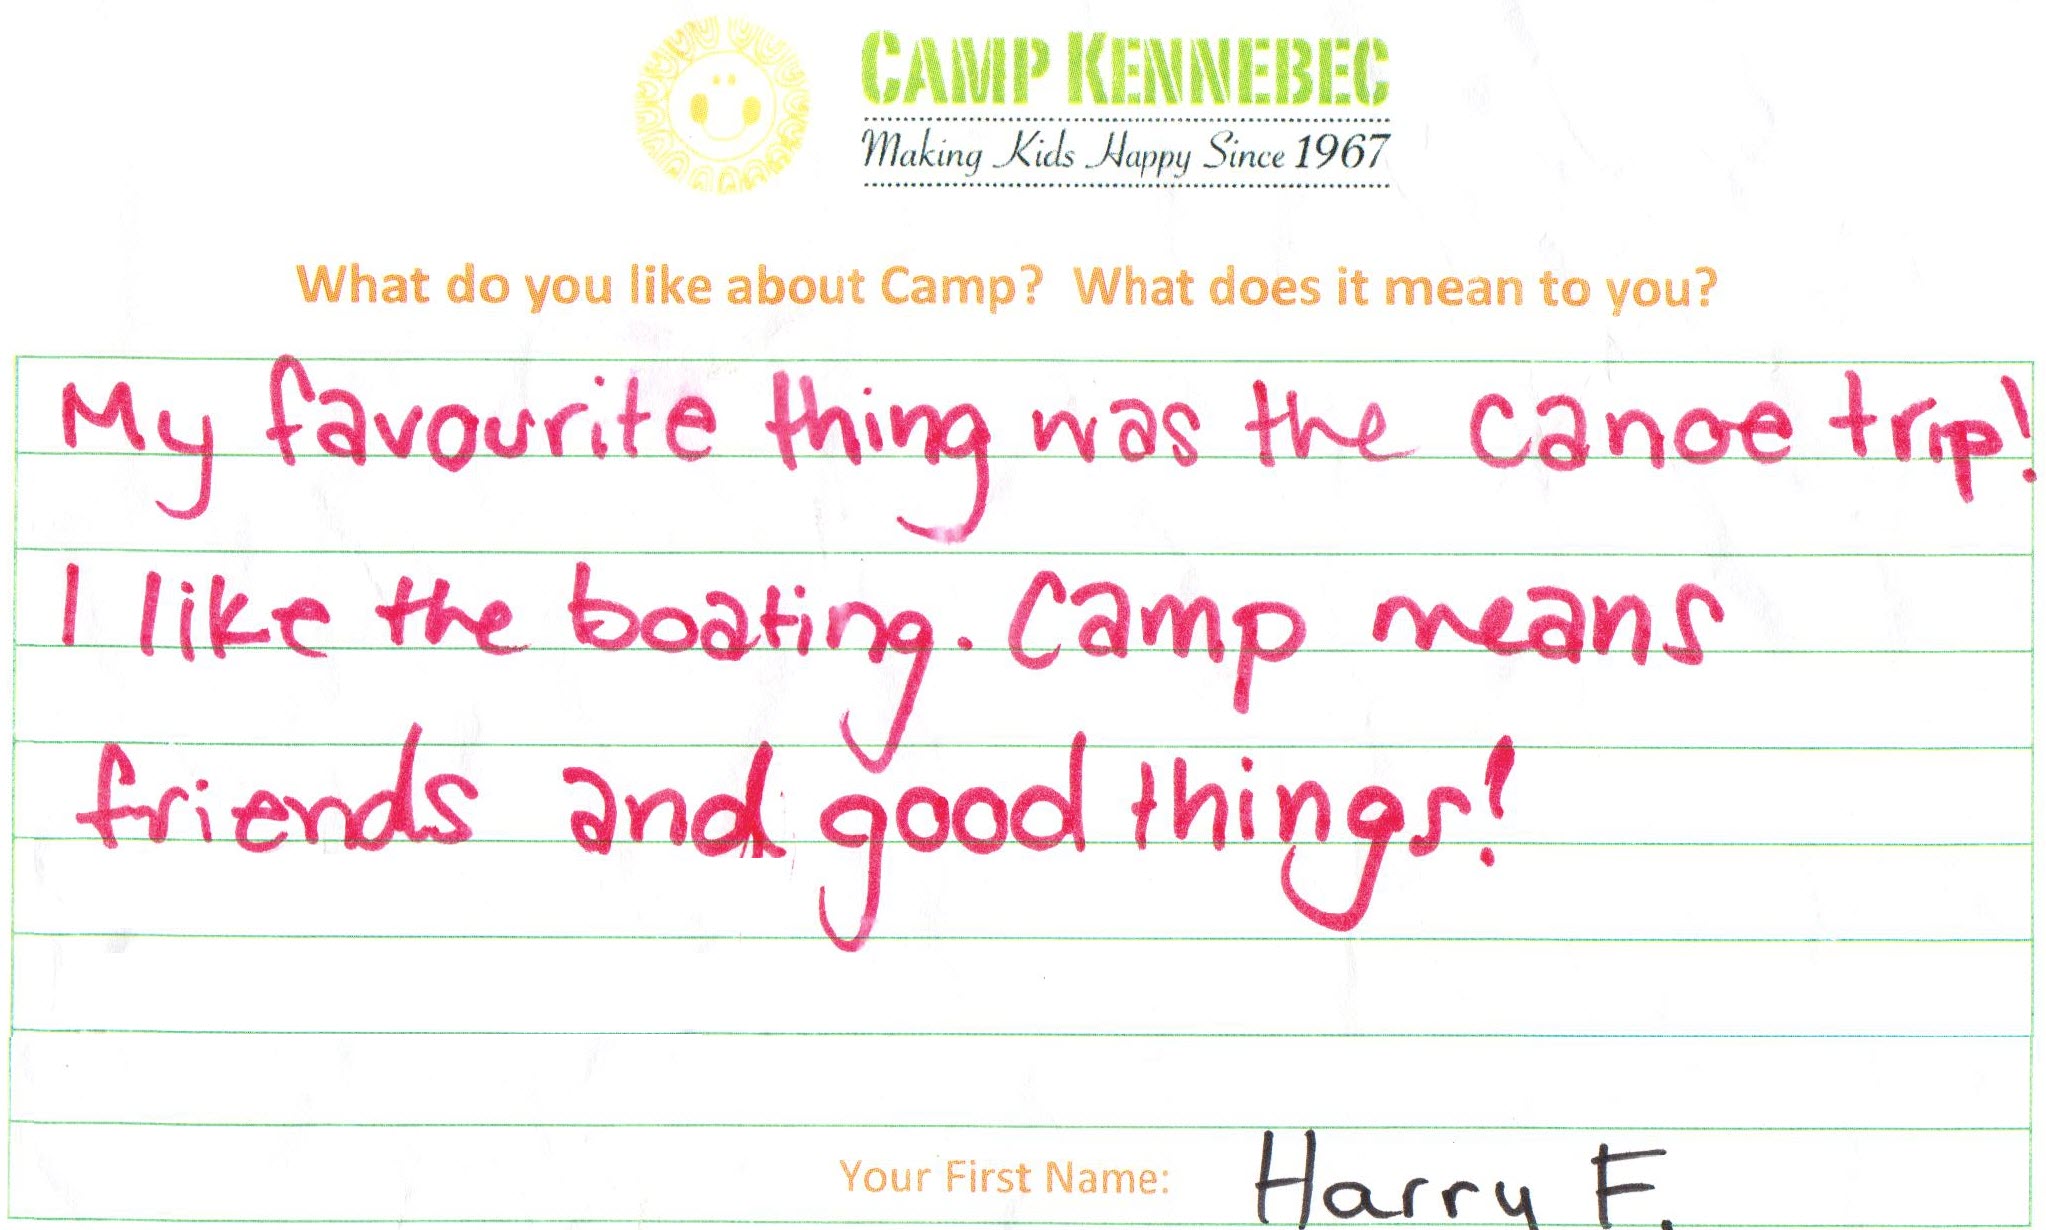 Camp Kennebec Campers tell us what they think of camp. This is an example:  My favourite thing was the canoe trip! I like boating. Camp means friends and good things! - Harry F. 